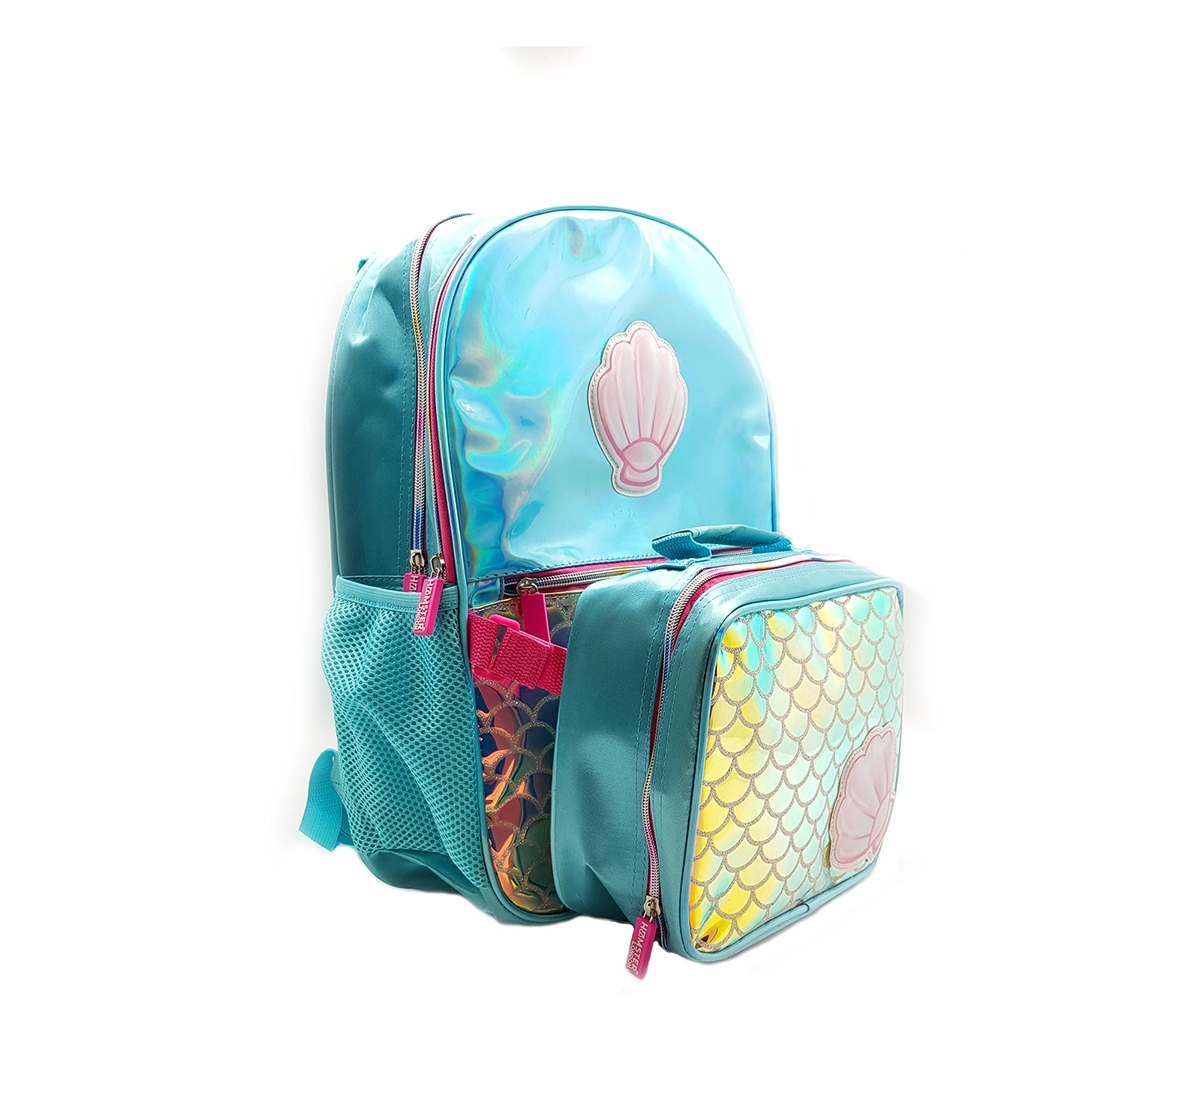 Hamster London | Hamster London Shiny Shell Backpack with Tiffin Bag for Girls age 3Y+ (Blue) 1